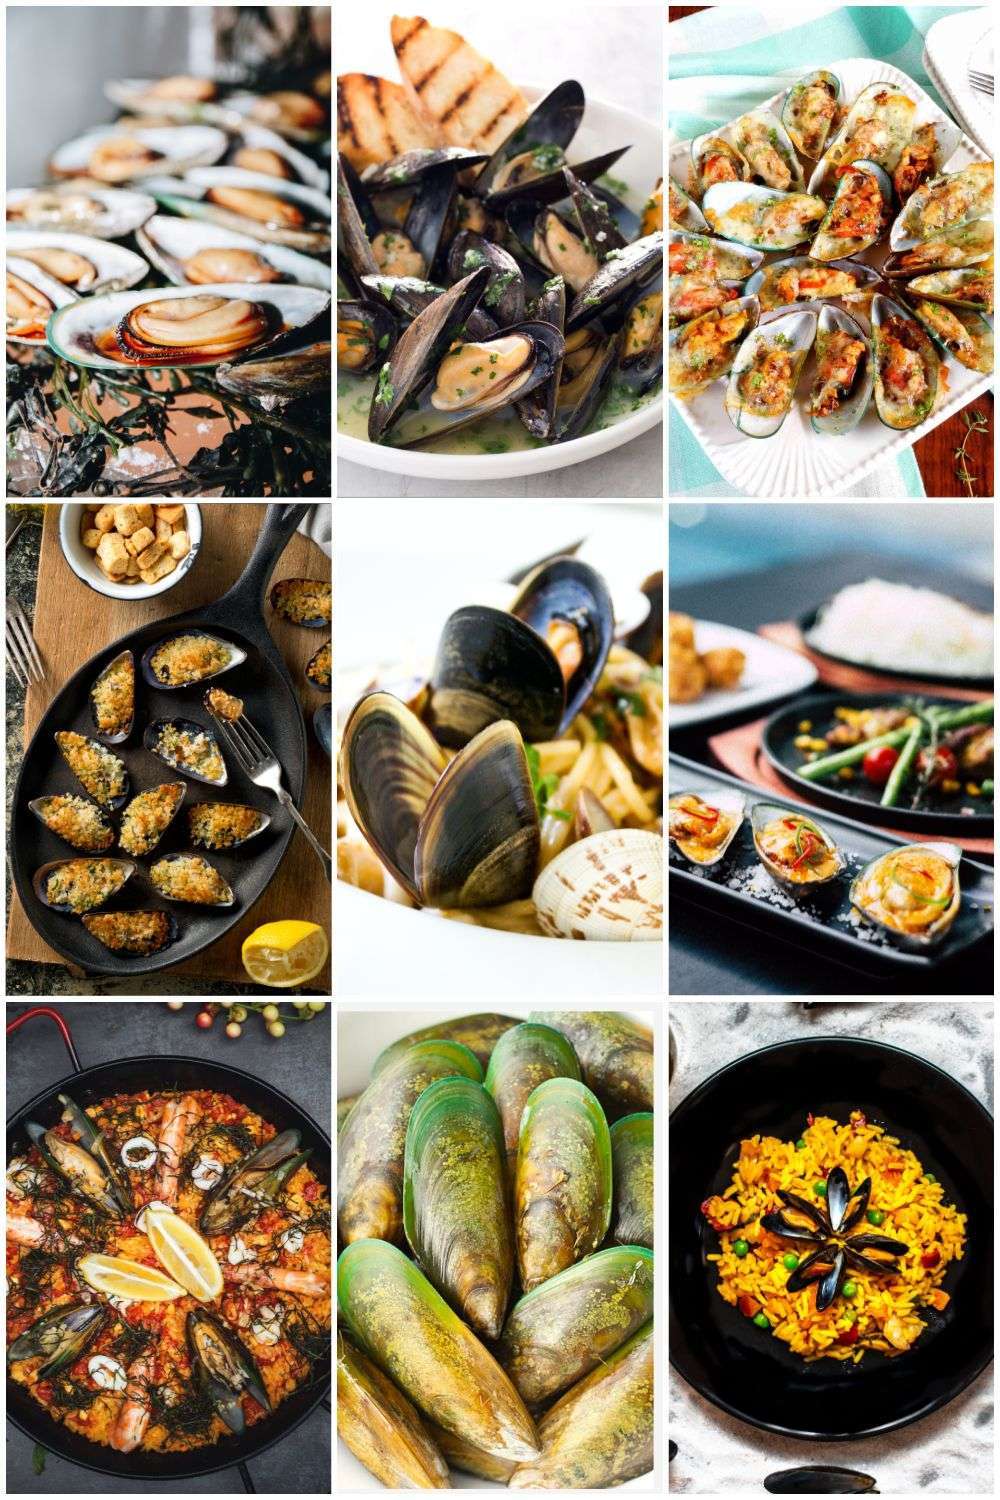 Baked mussels recipes